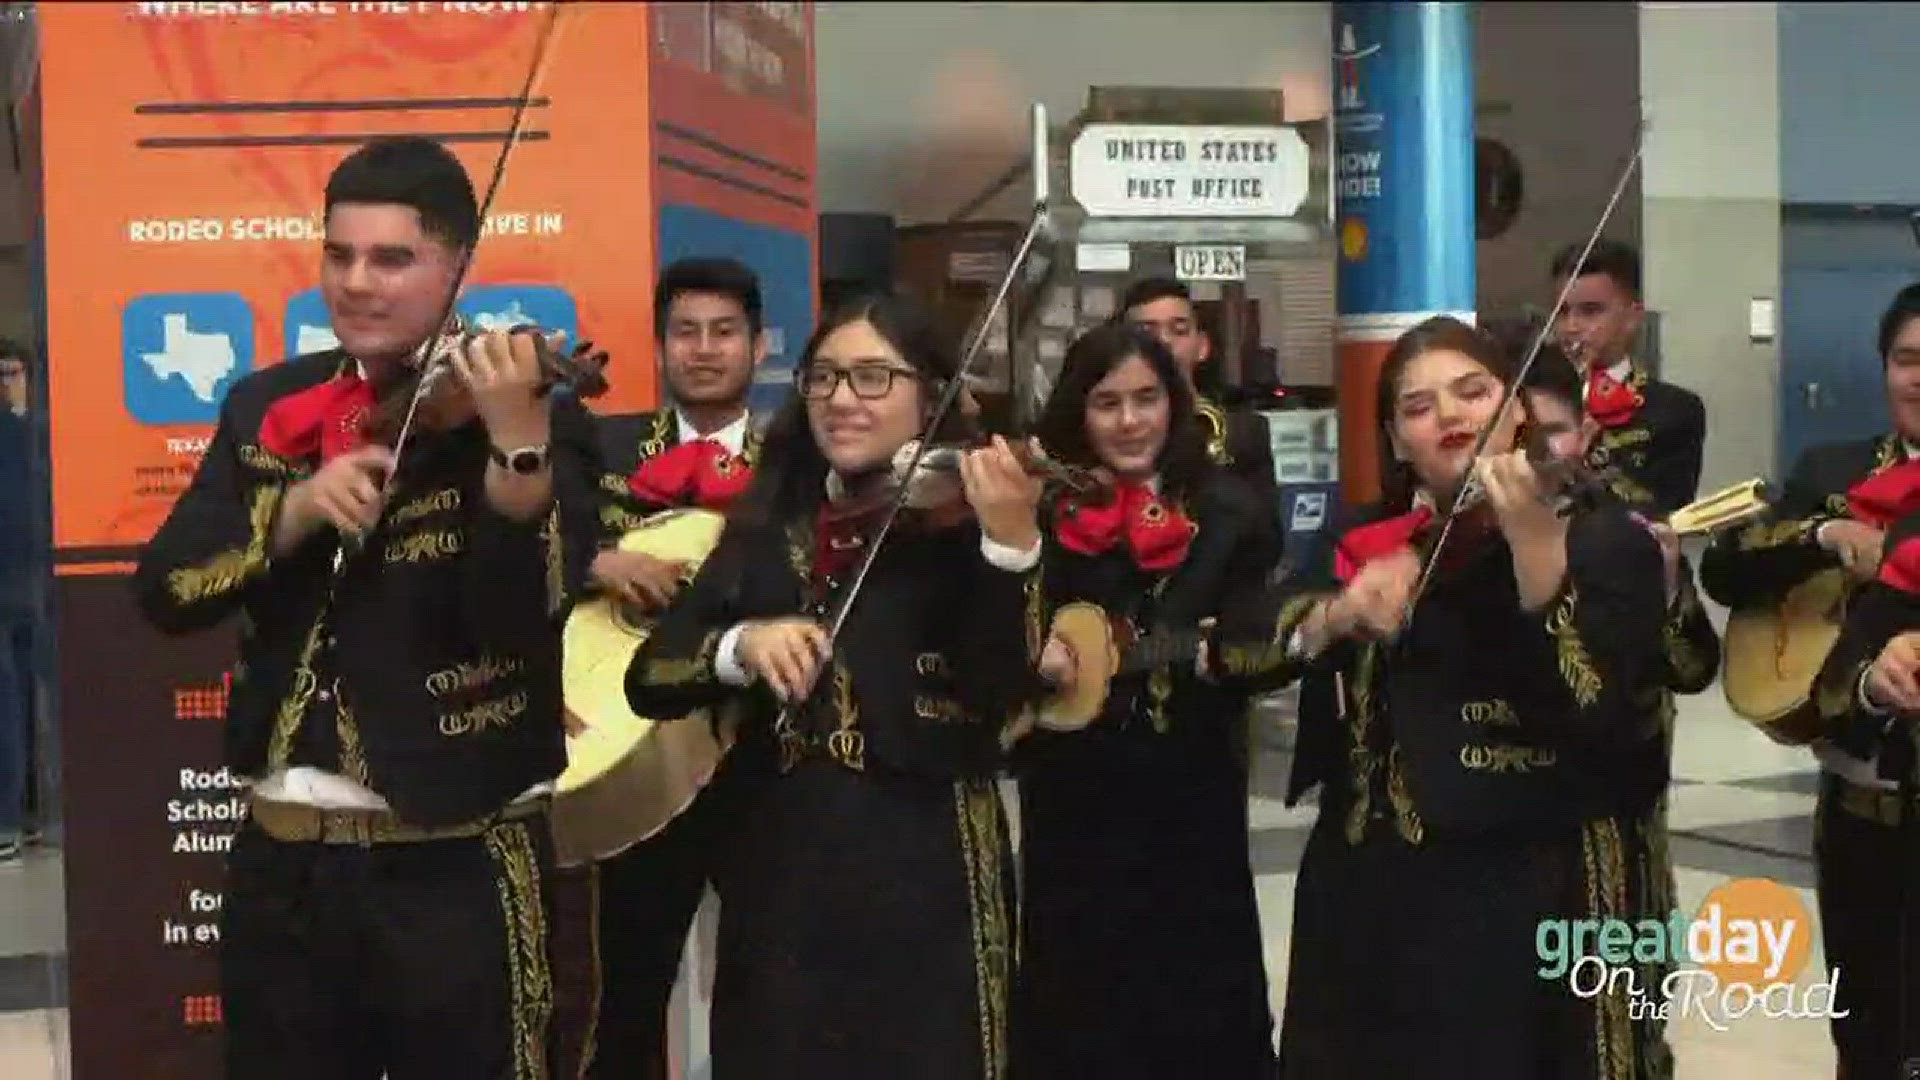 A performance from one of the participants of this weekend's Mariachi Invitational